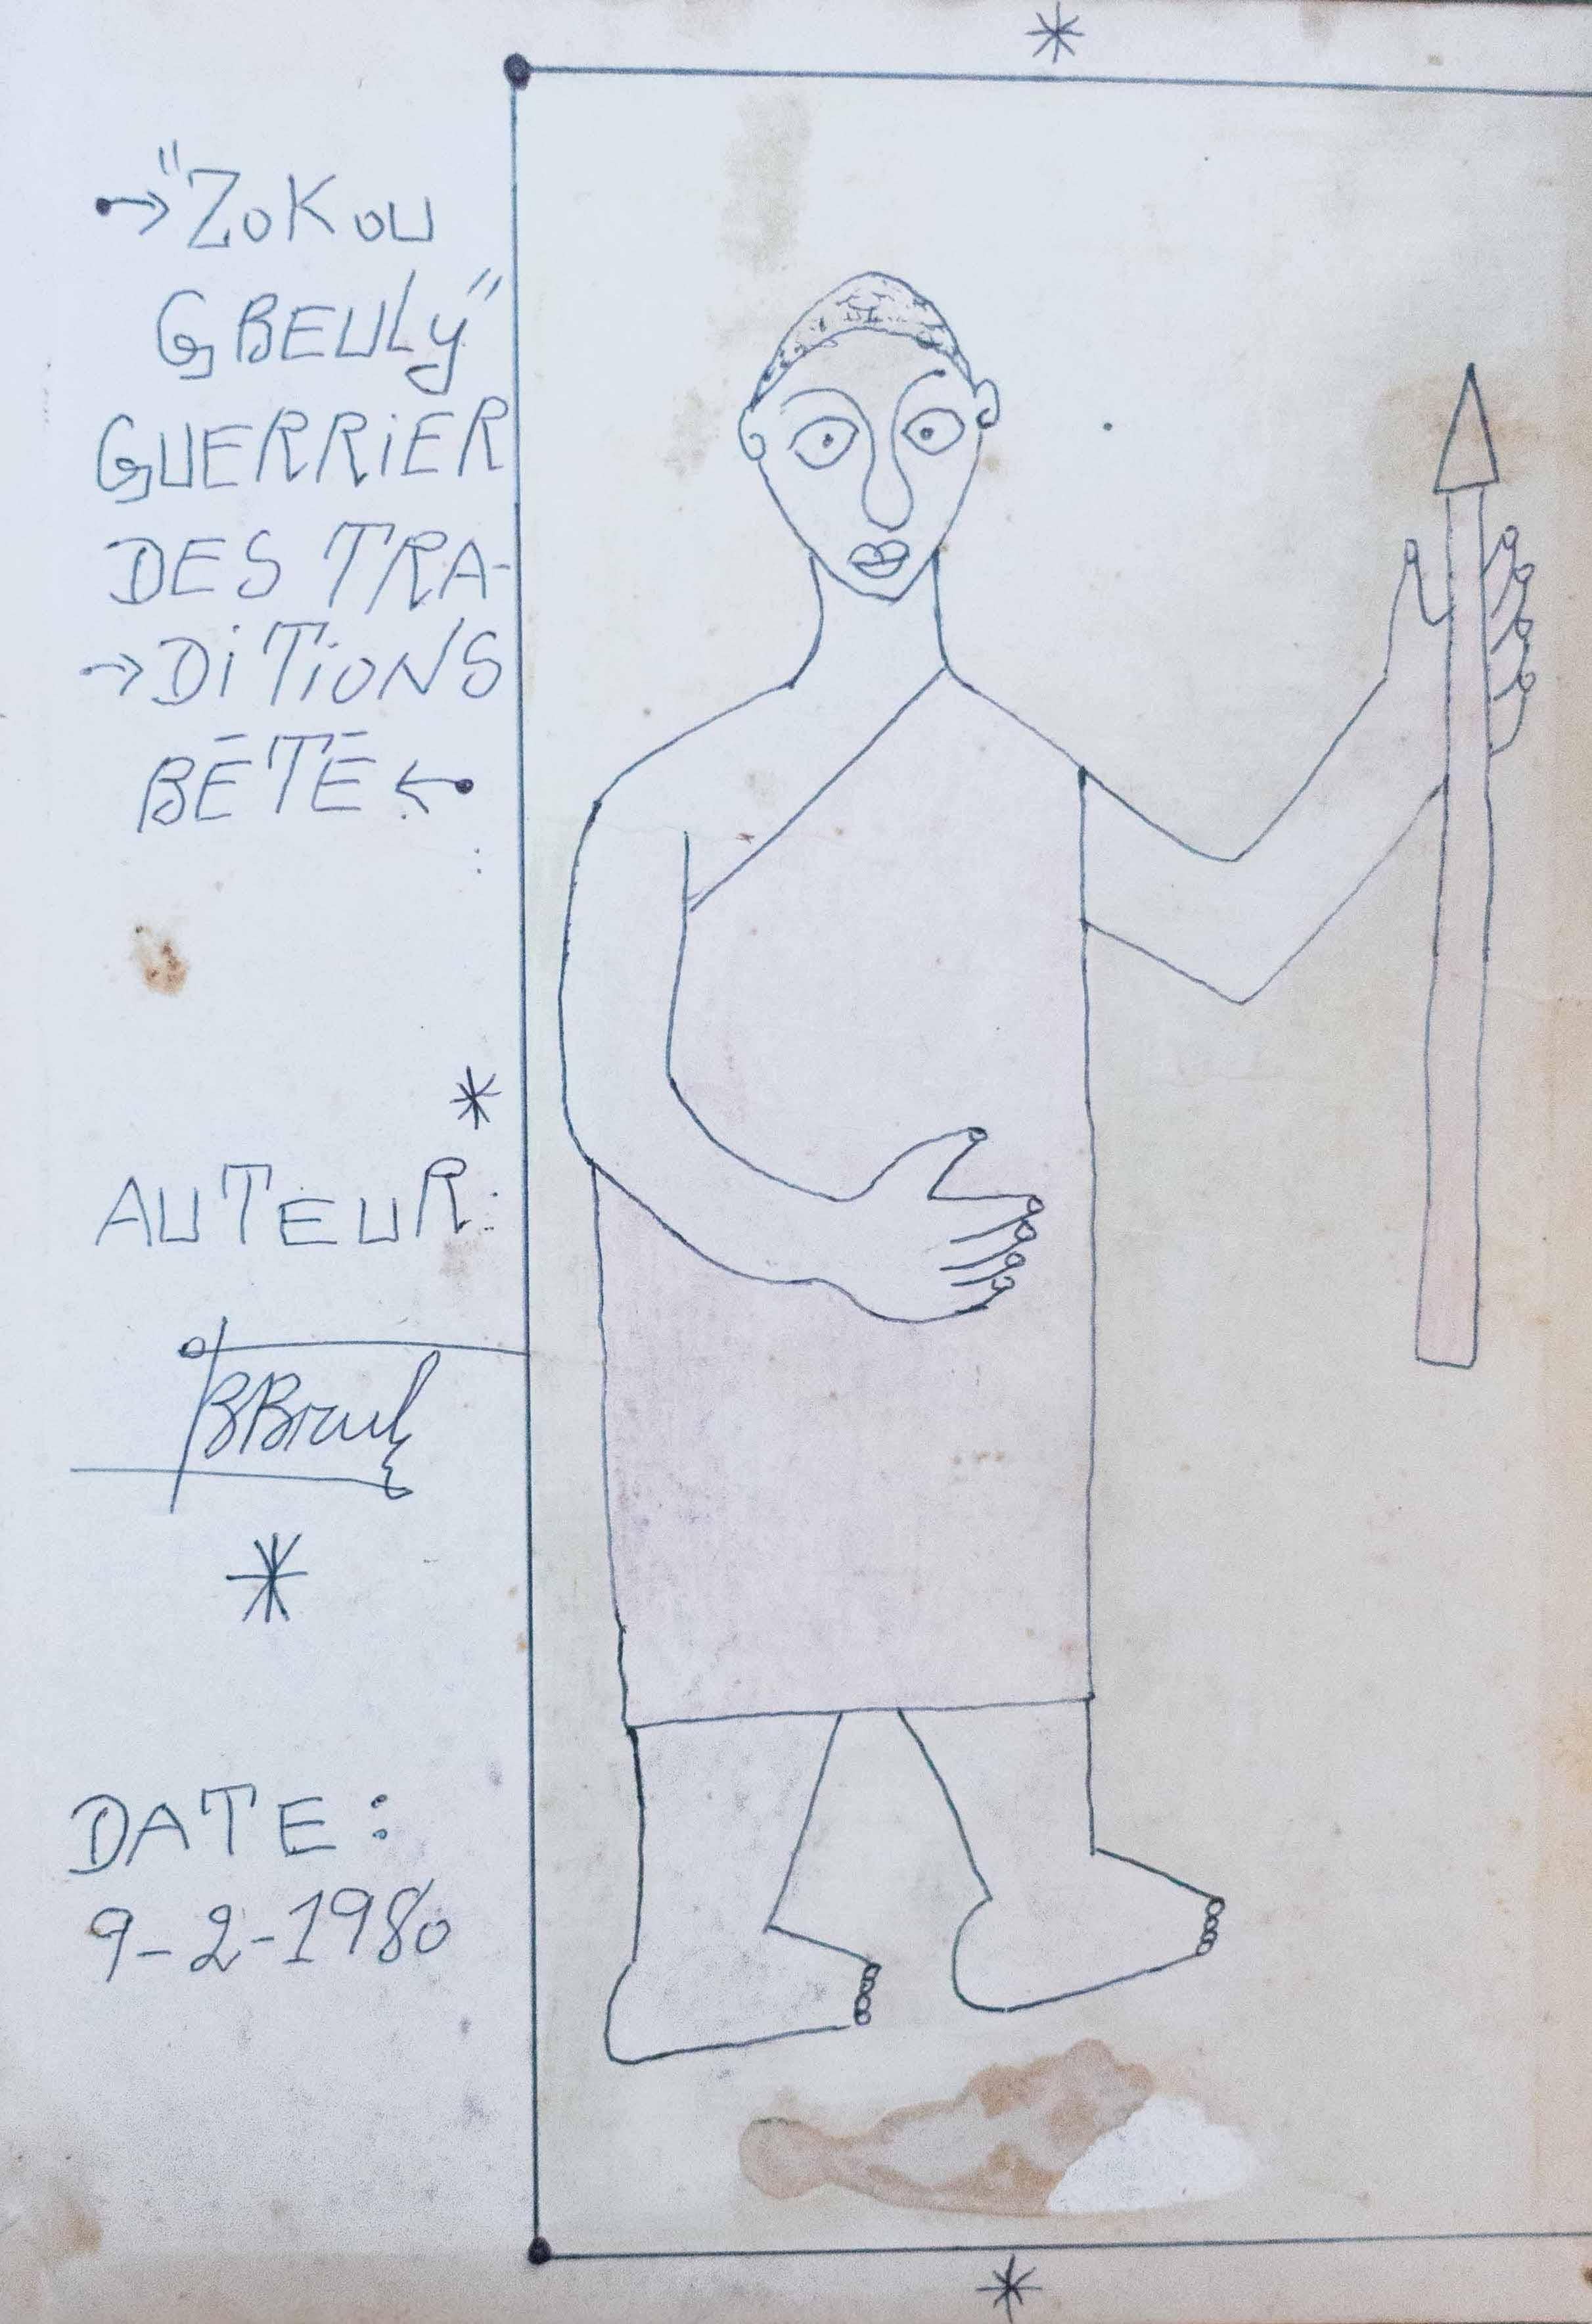 Frédéric Bruly Bouabré, Zokou Gbeuli guerrier des traditions Bétè, 09-02-1980, Drawing in ballpoint pen and colored pencils on cardboard, 29 x 20 cm, Titled, signed and dated on the front, With certificate of authentication issued by the artist's